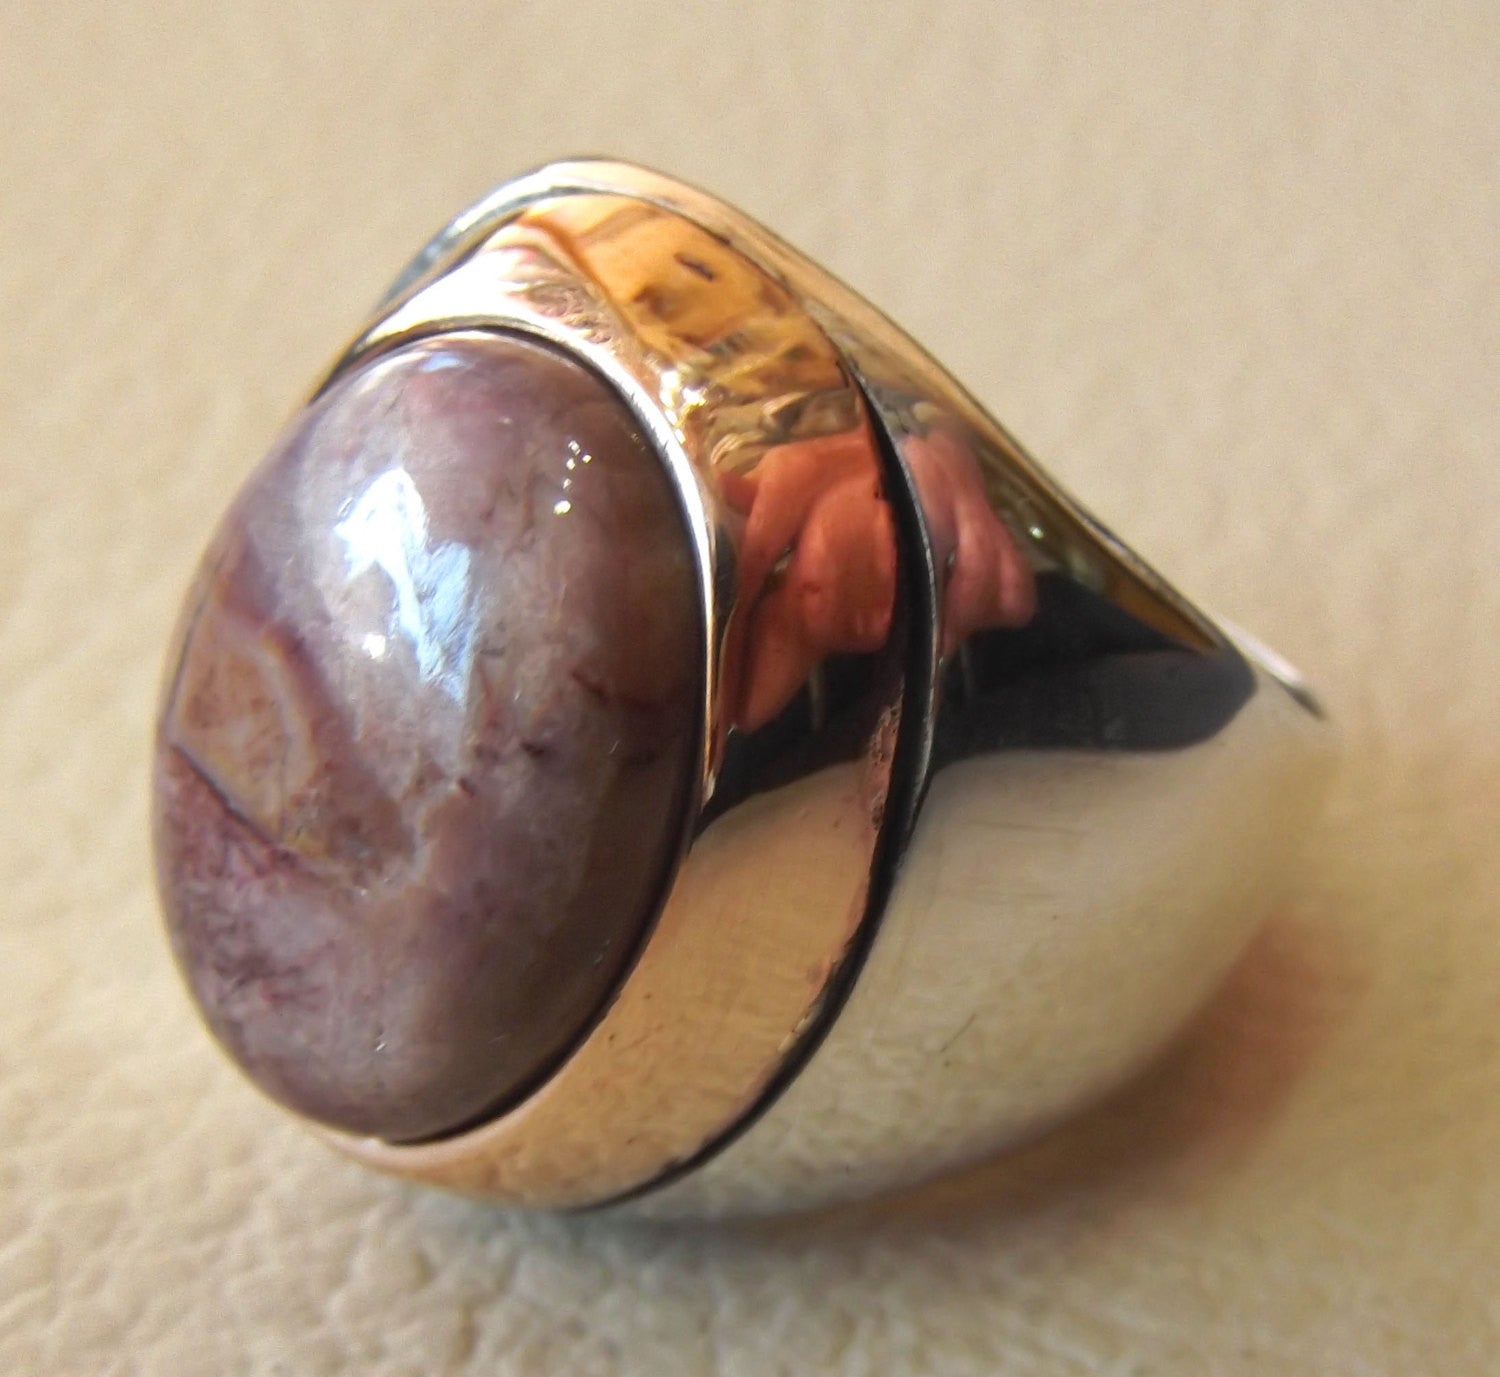 Butterfly jasper natural stone sterling silver 925 huge man ring all sizes jewelry ottoman cocktail high quality style gem in bronze frame